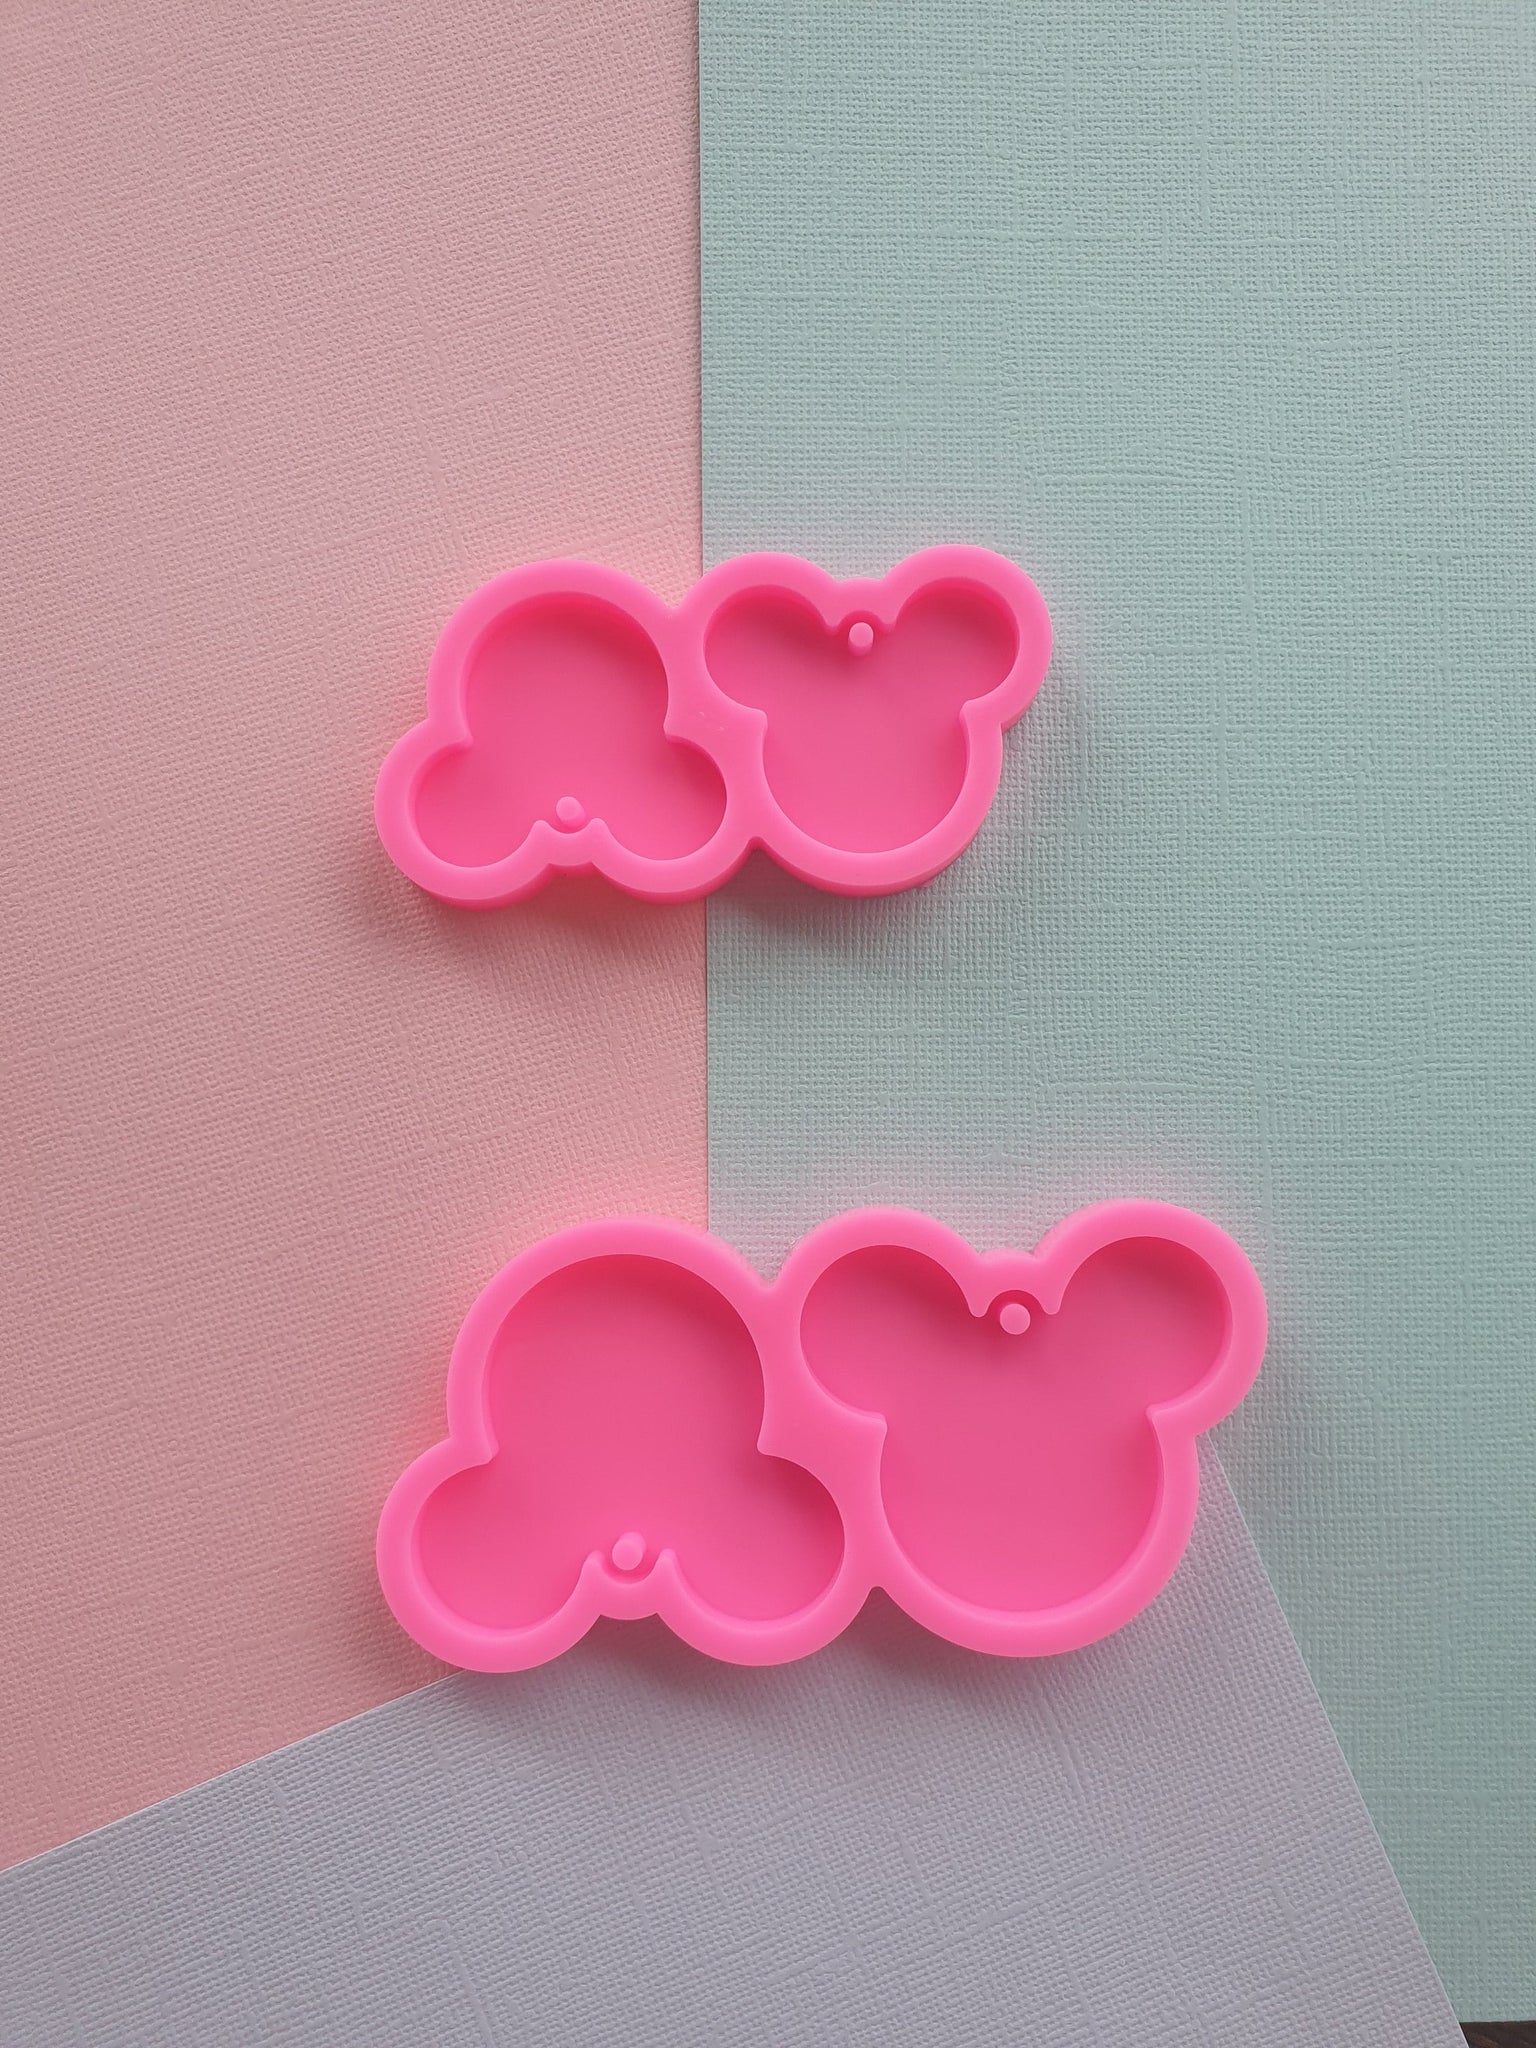 1pc Mickey Mouse earring mould, dangle drop mold, shiny Silicone mold, DIY Jewelry Making, epoxy Resin mould, Jewellery supplies australia